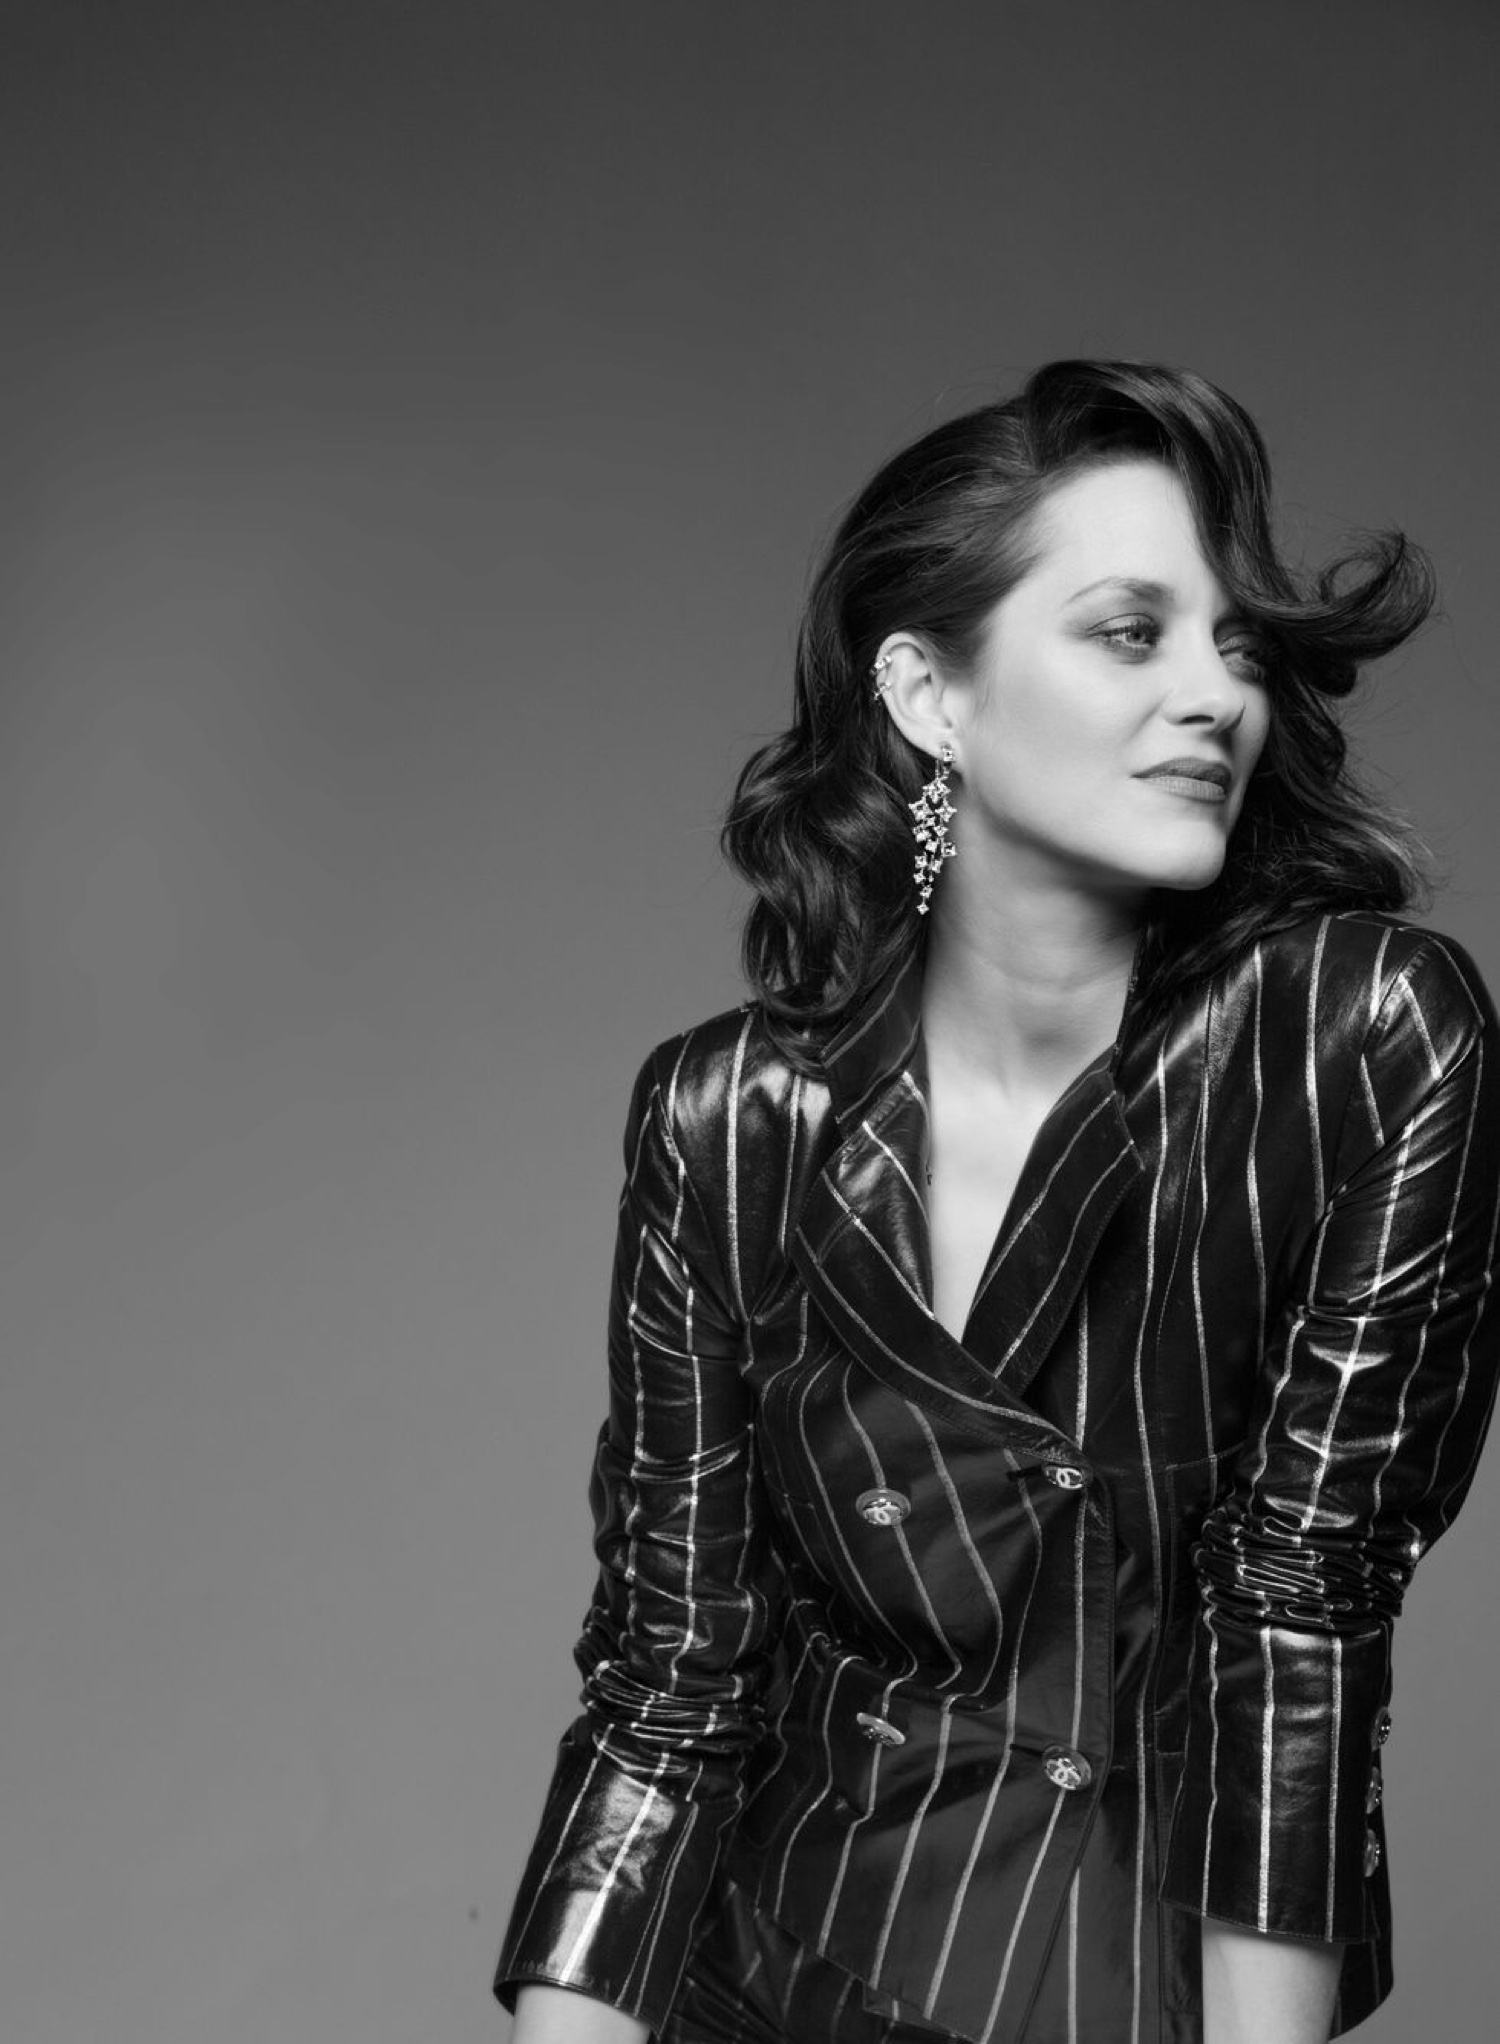 Marion Cotillard poses for Chopard Ice Cube jewelry campaign.